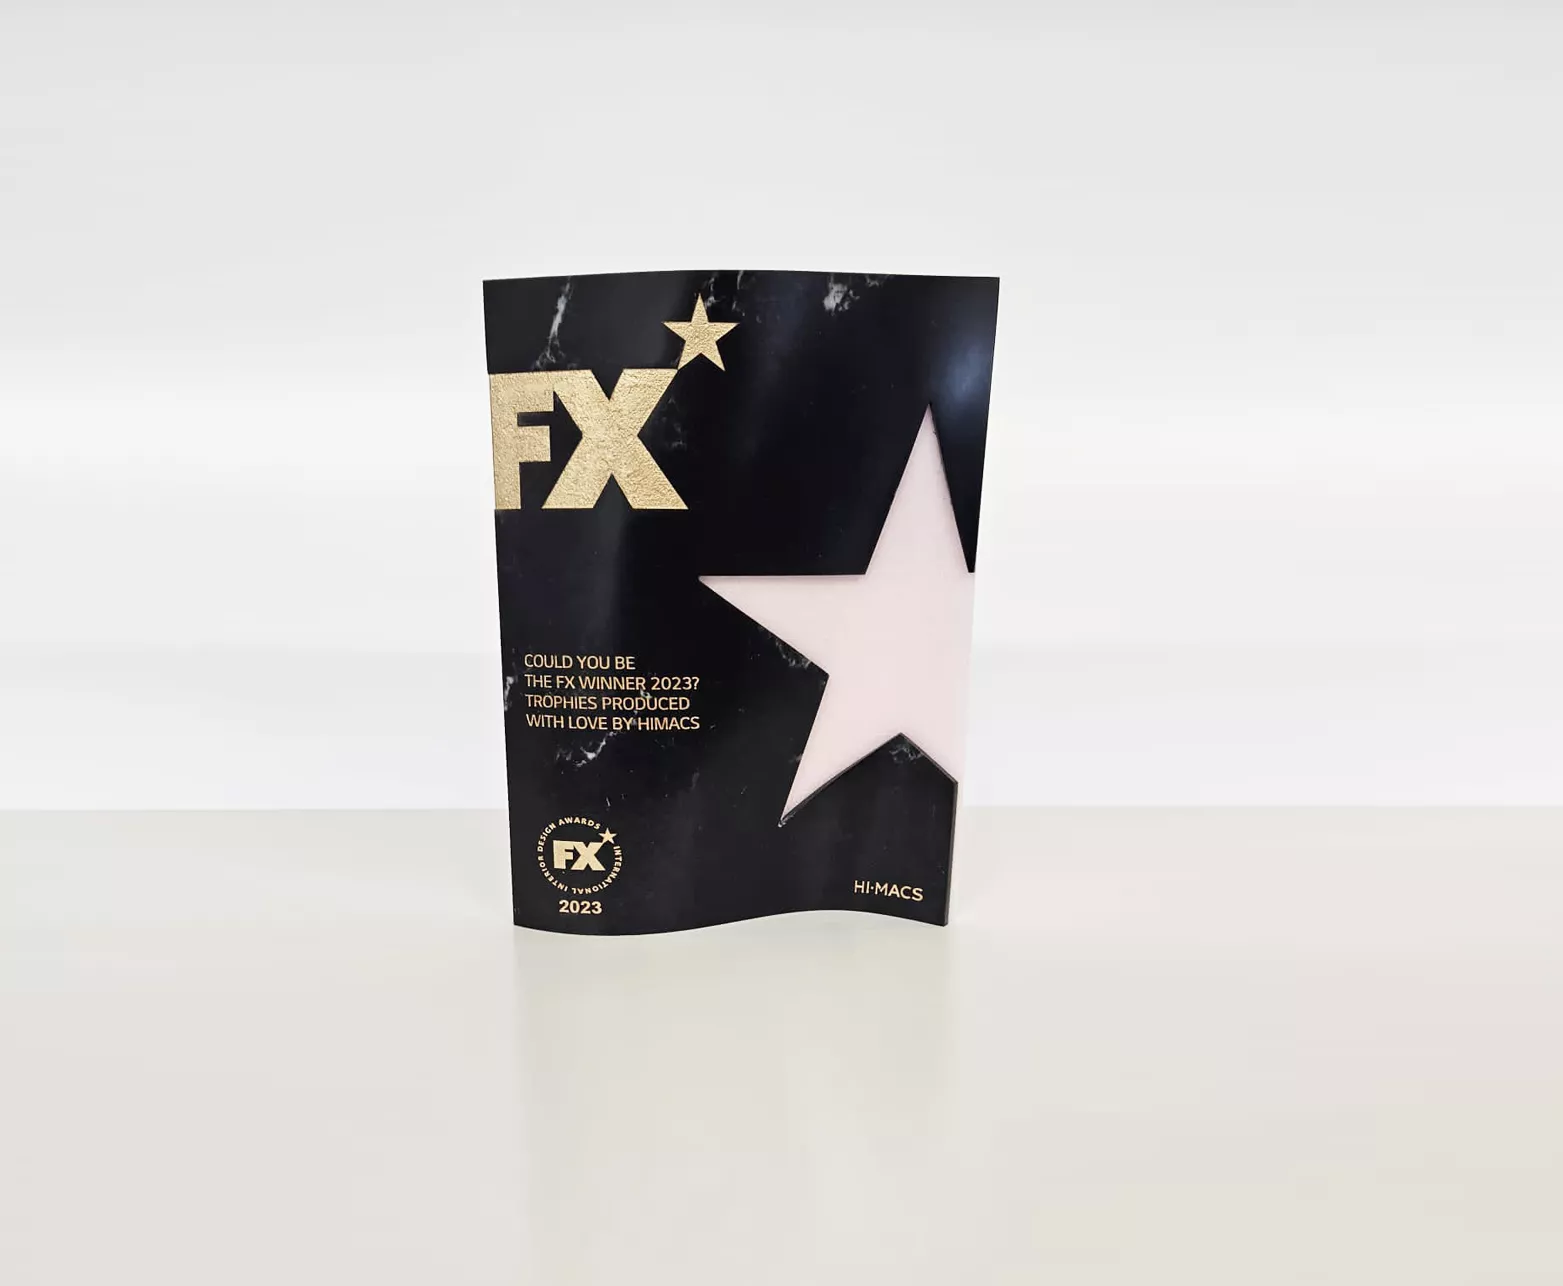 HIMACS is proud to sponsor the FX Design Awards in 2023 for the second year running